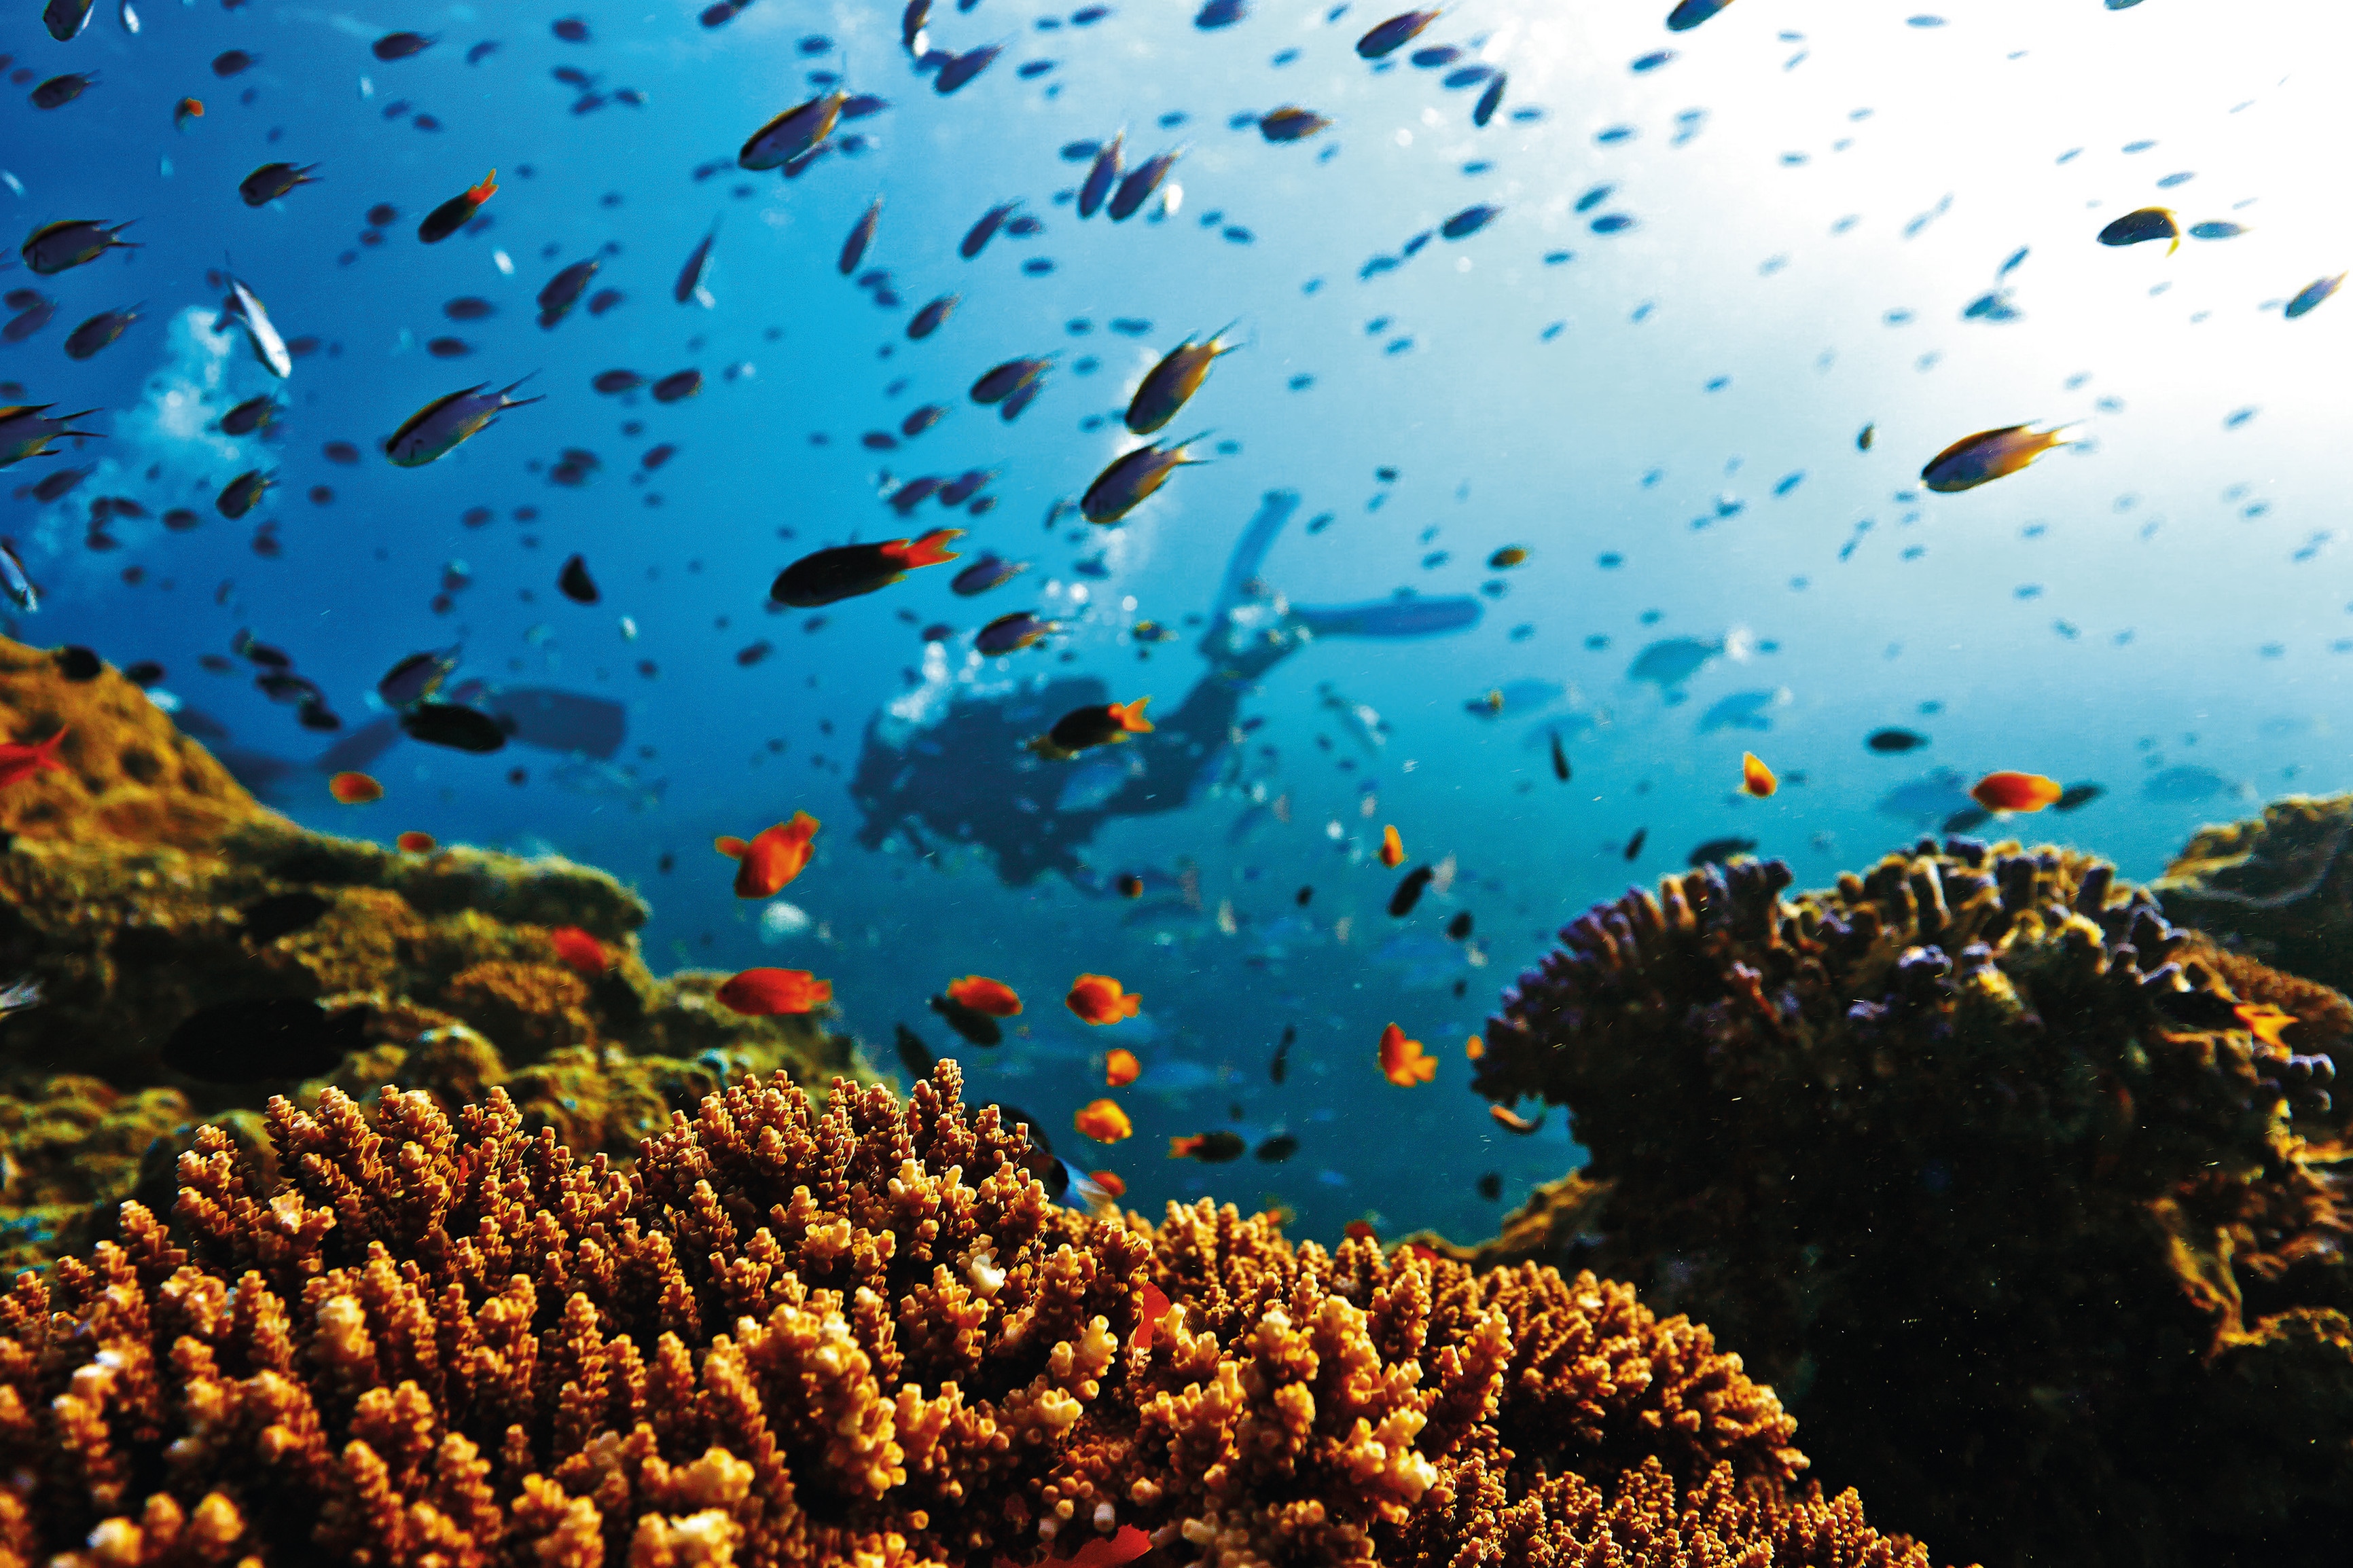 Guide to the Southern Great Barrier Reef - Tourism Australia